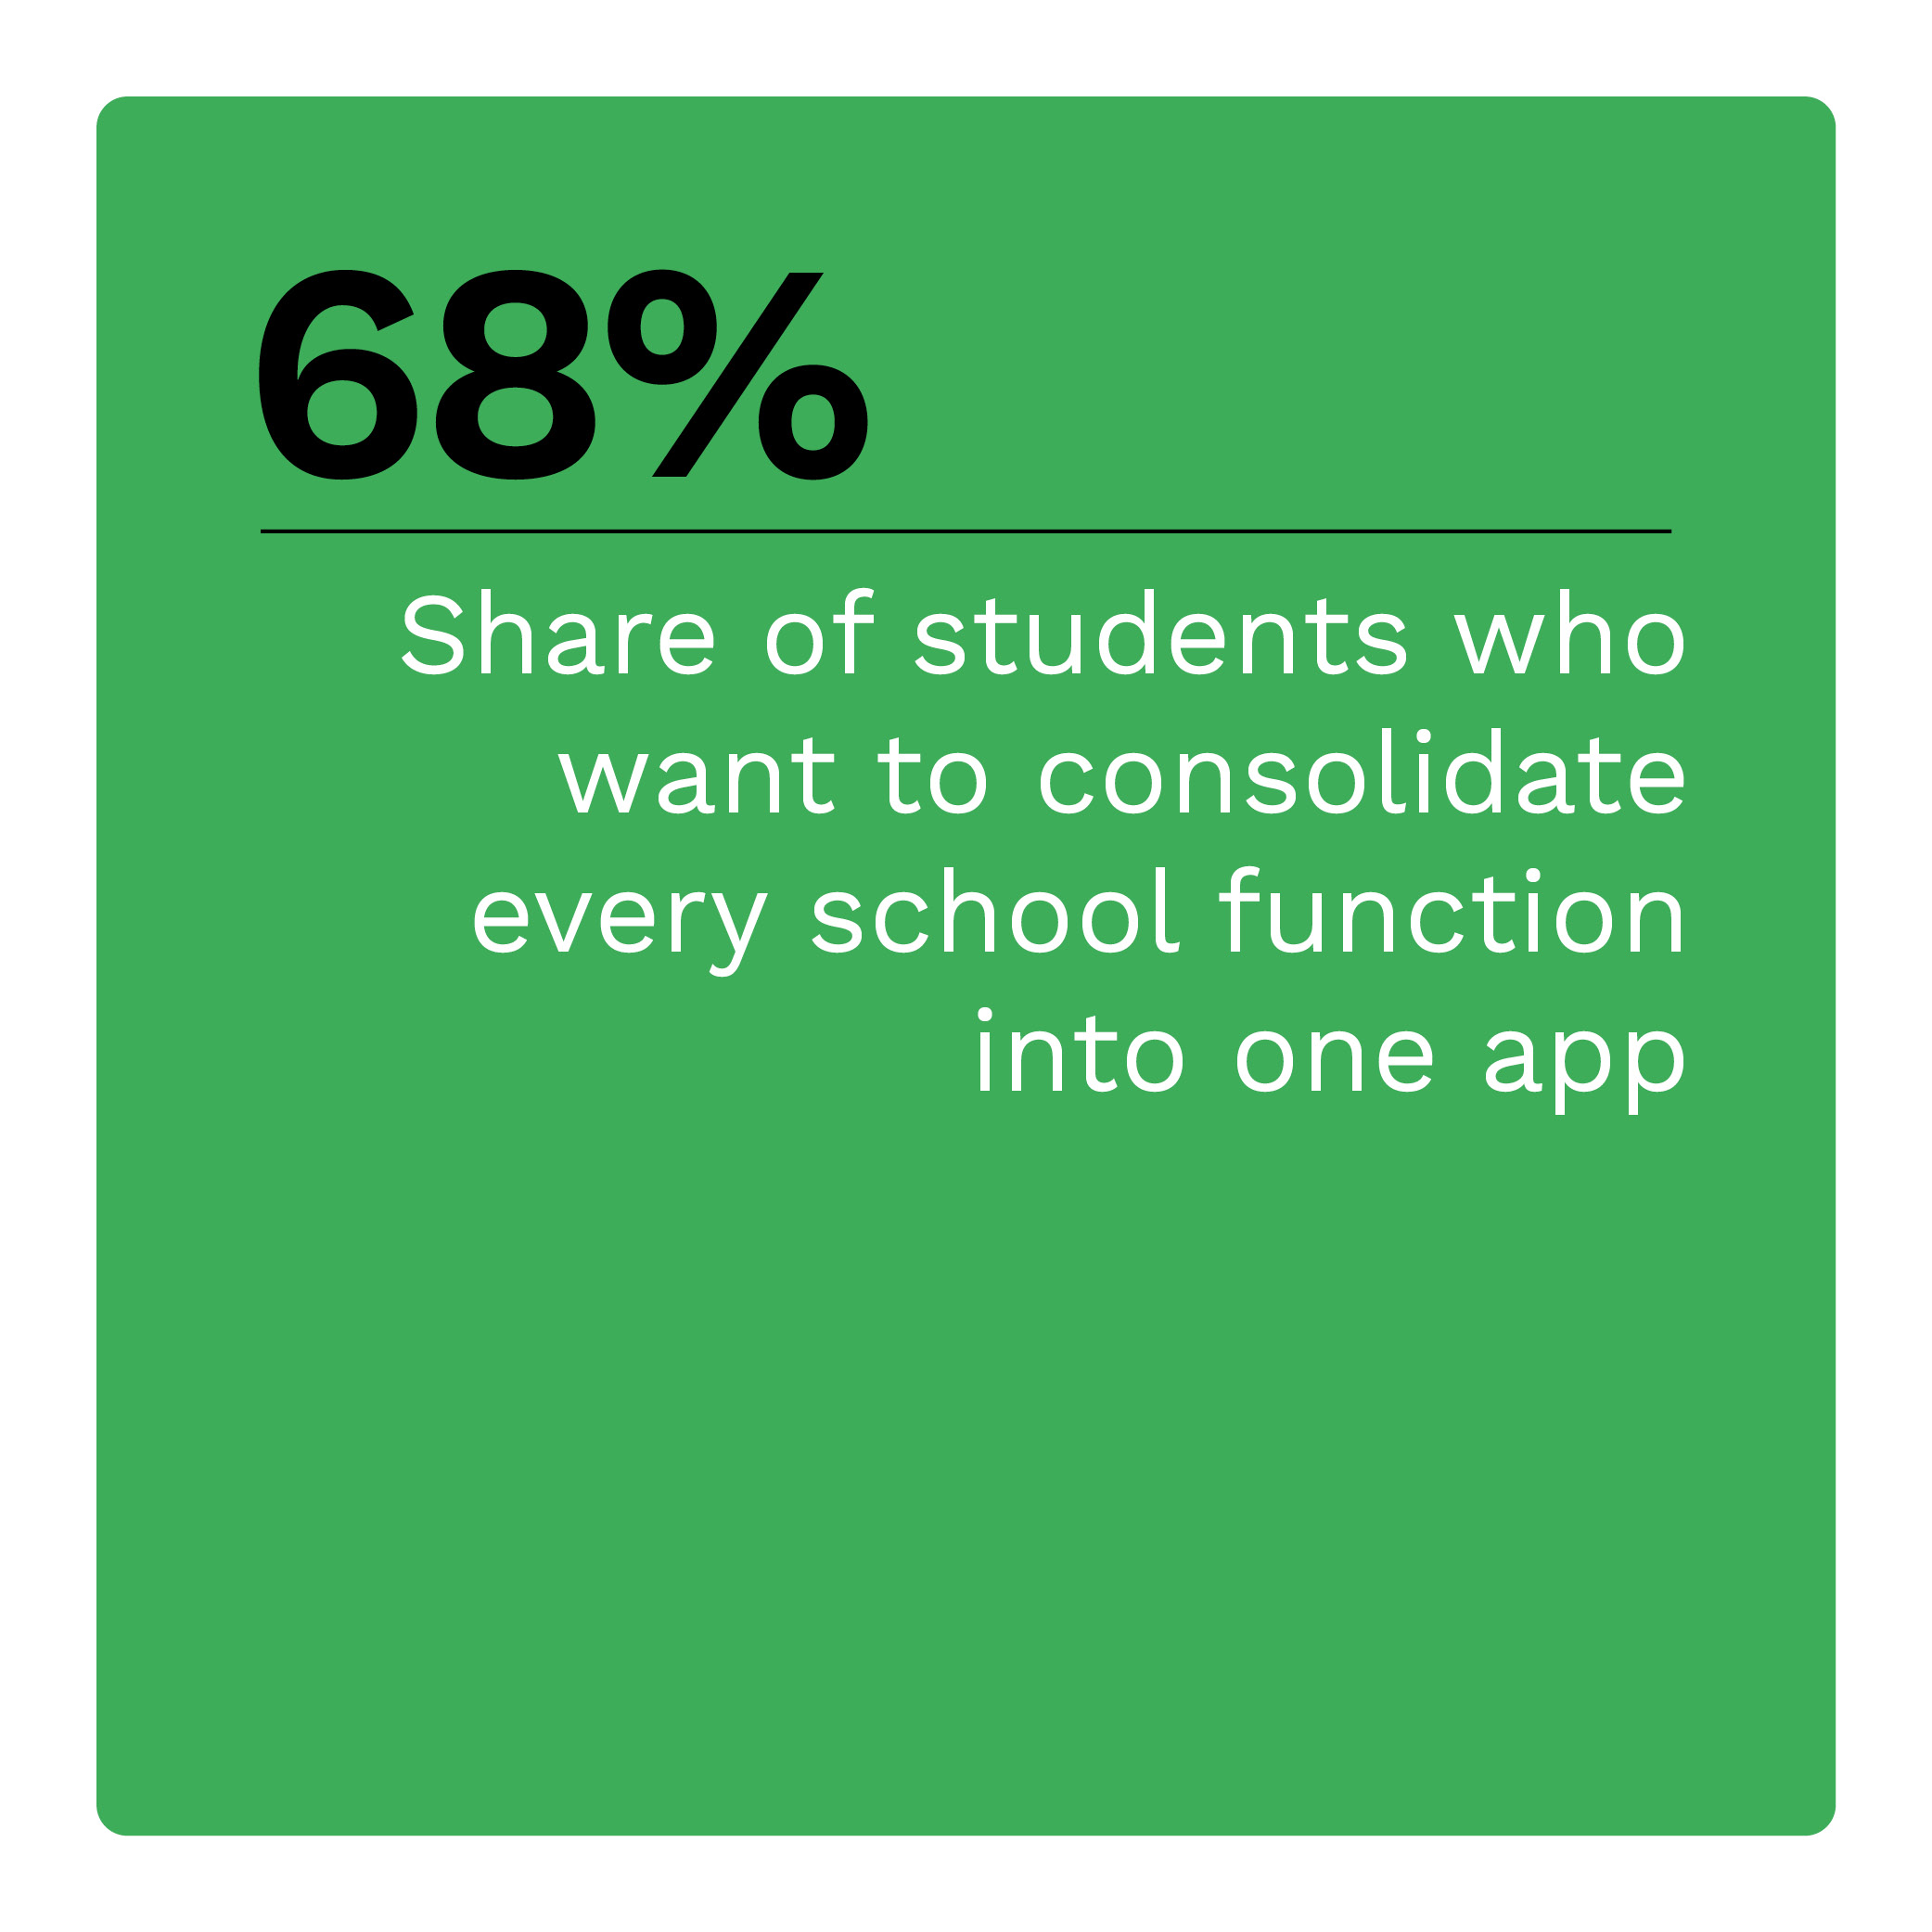 68%: Share of students who want to consolidate every school function into one app